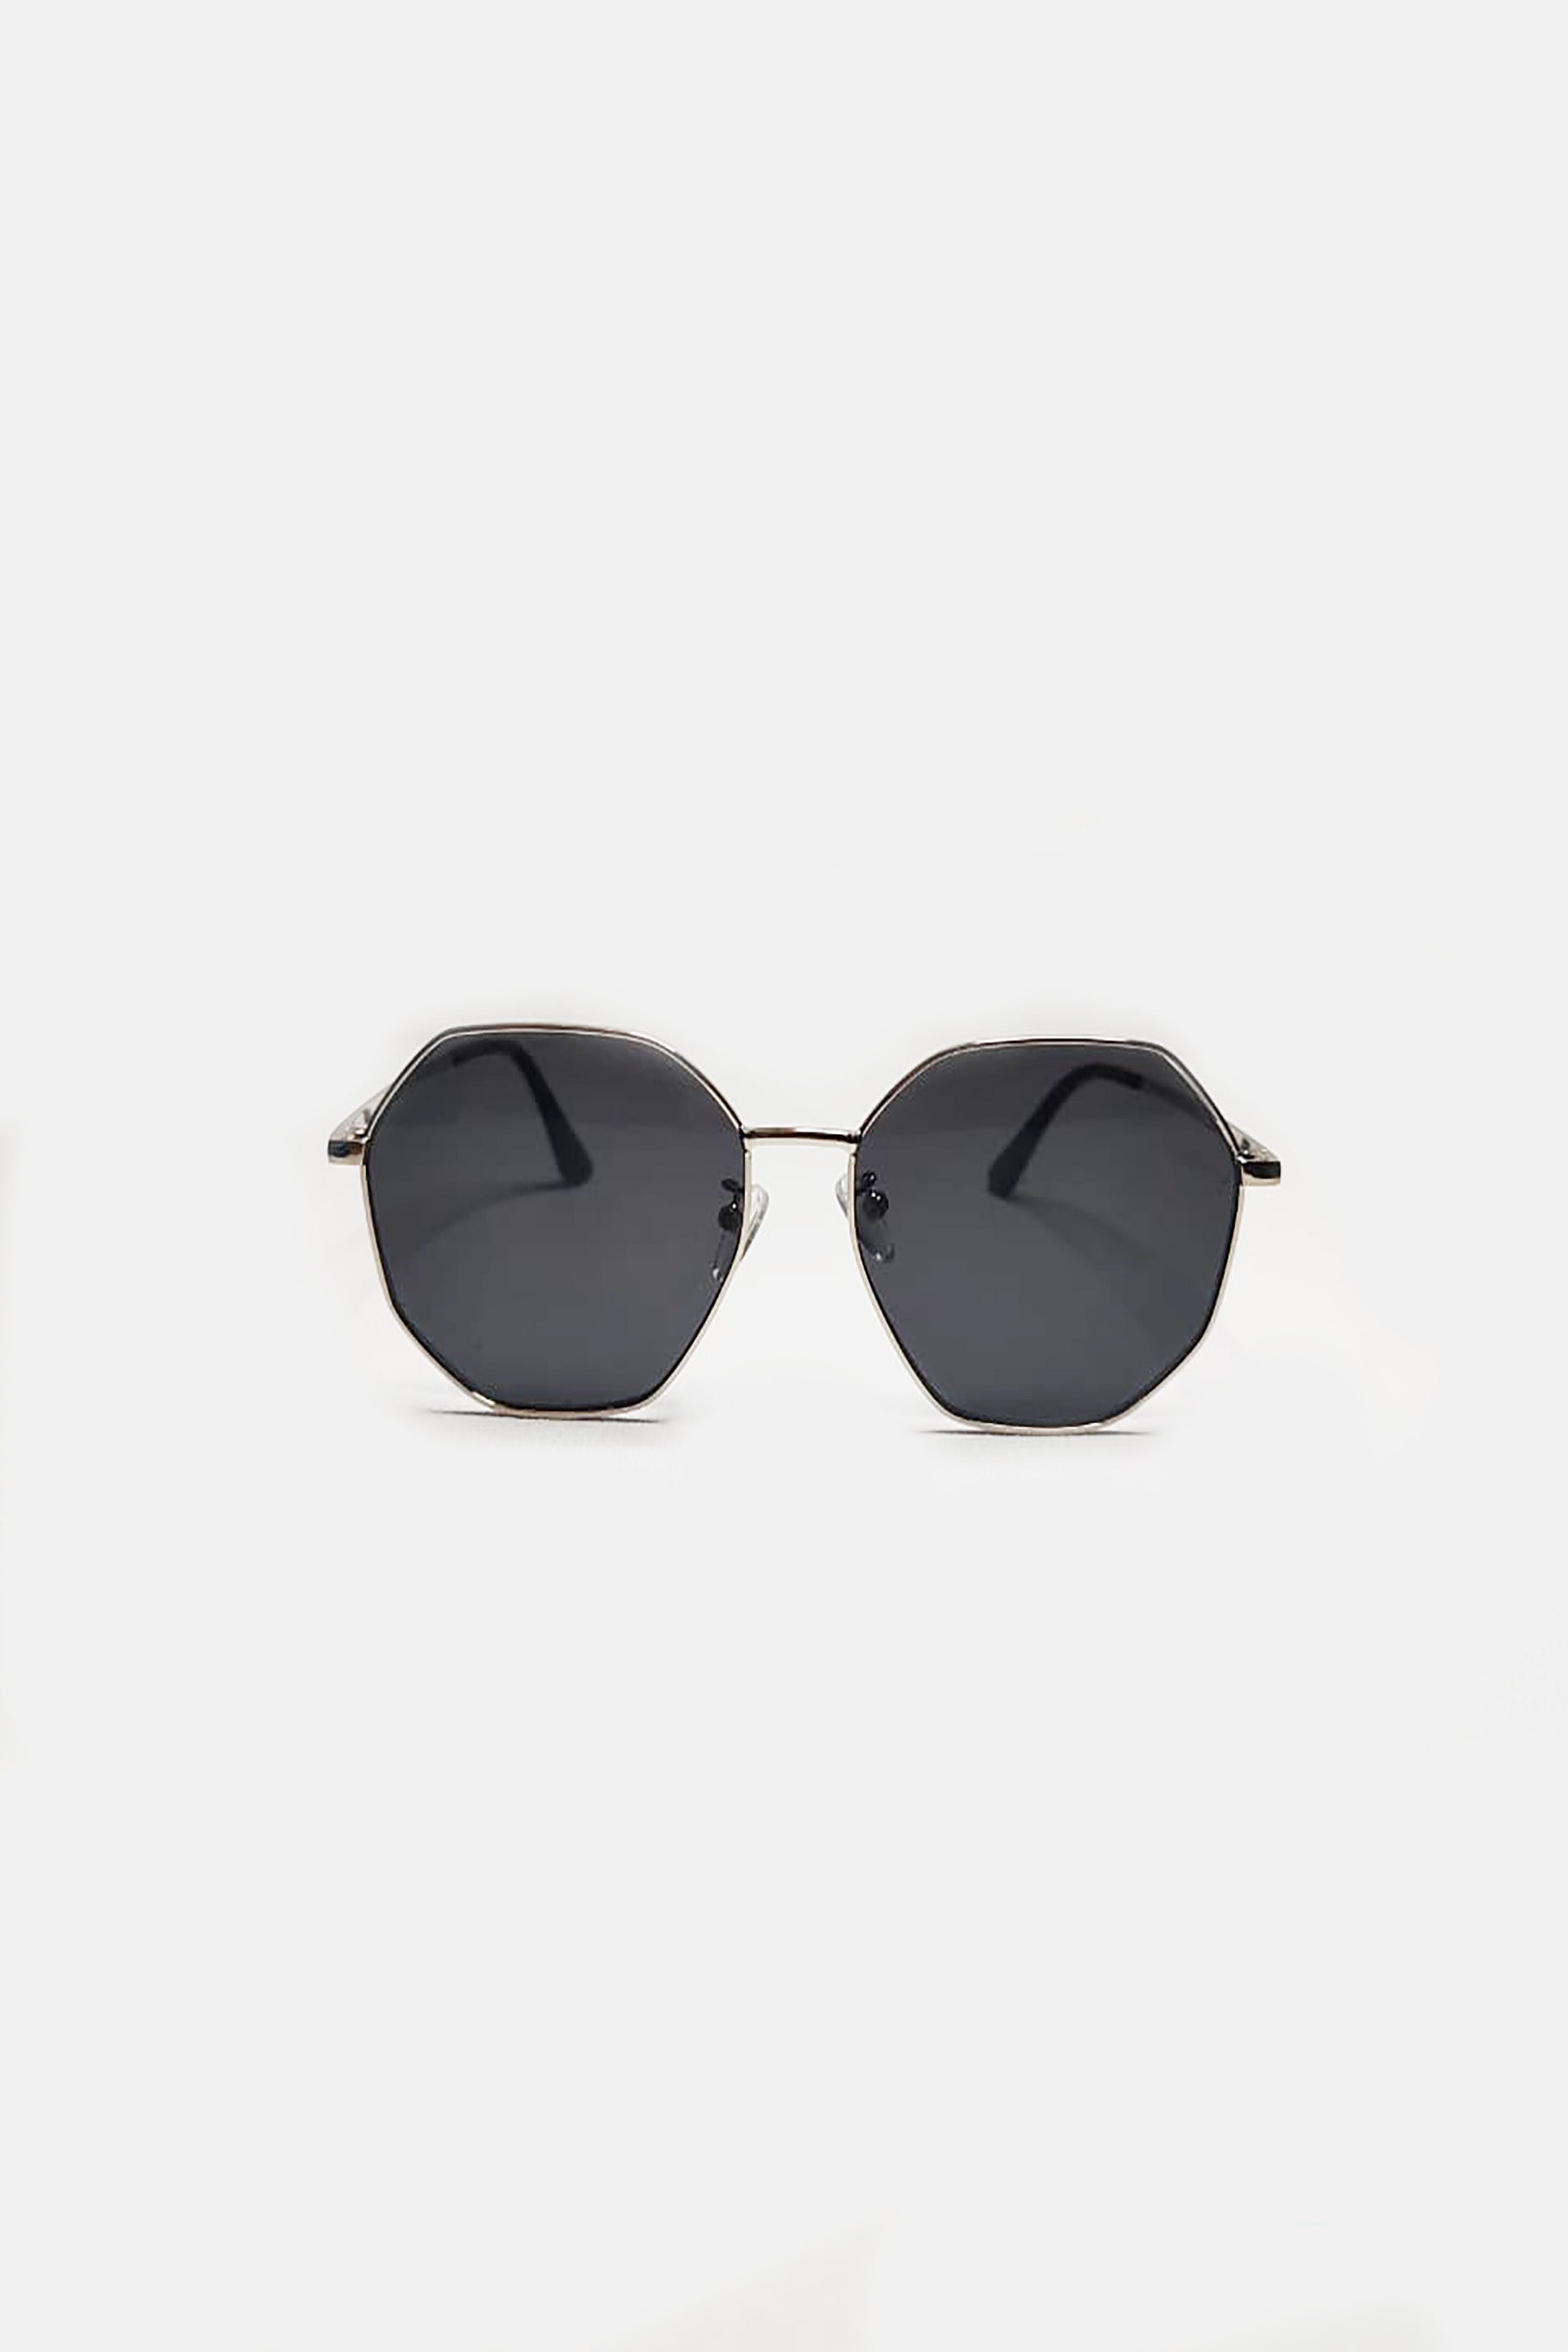 Silver Frame Sunglasses with Black Tinted